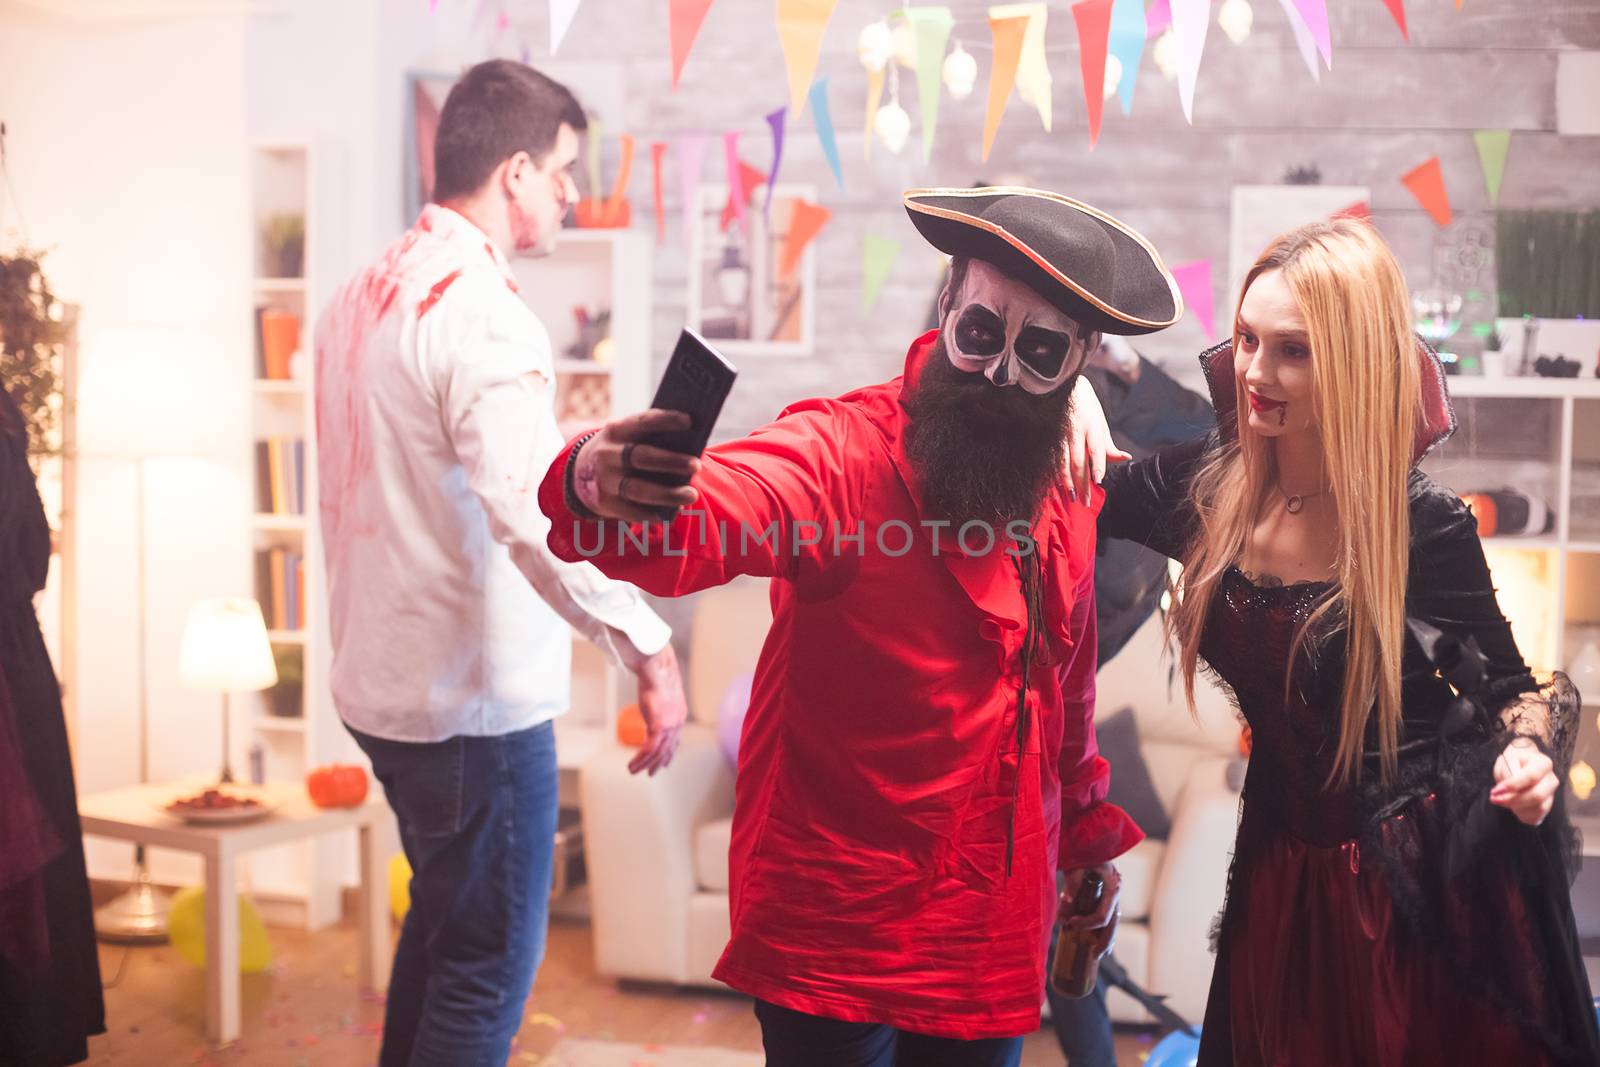 Couple dressed up like a pirate and vampire taking a selfie at halloween party.